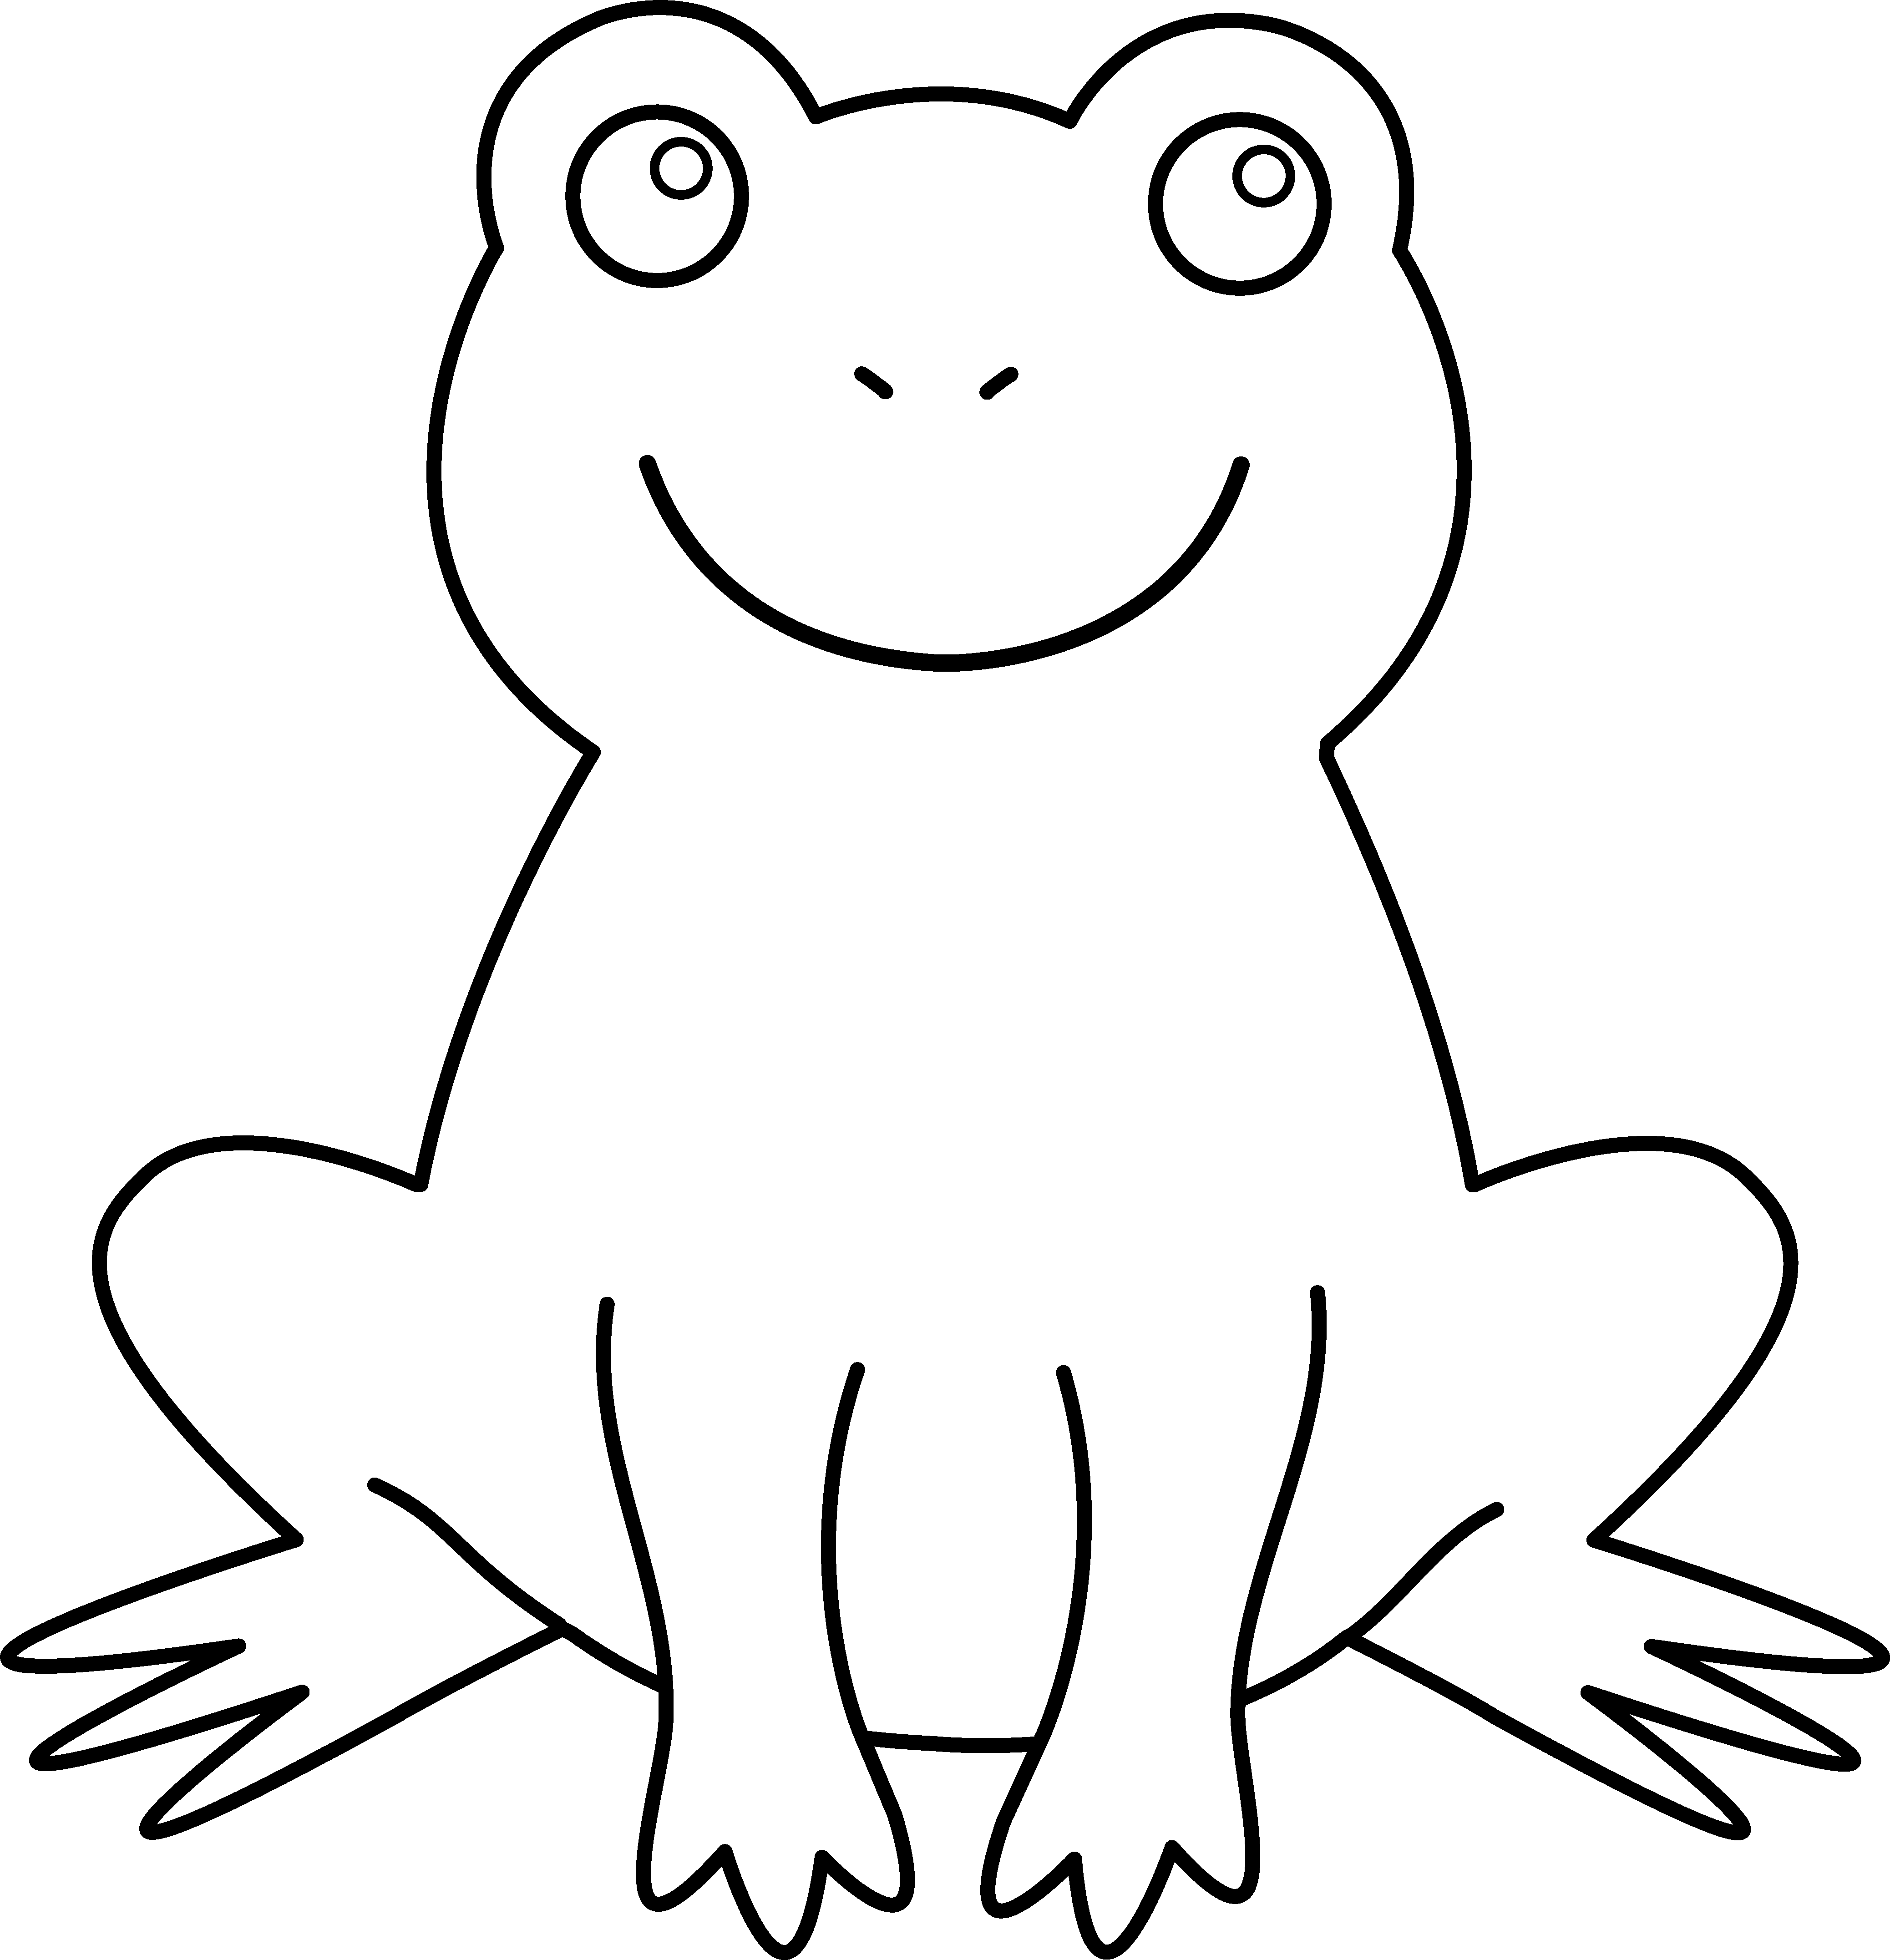 Tree Frog Clip Art Black And White | Clipart library - Free Clipart 